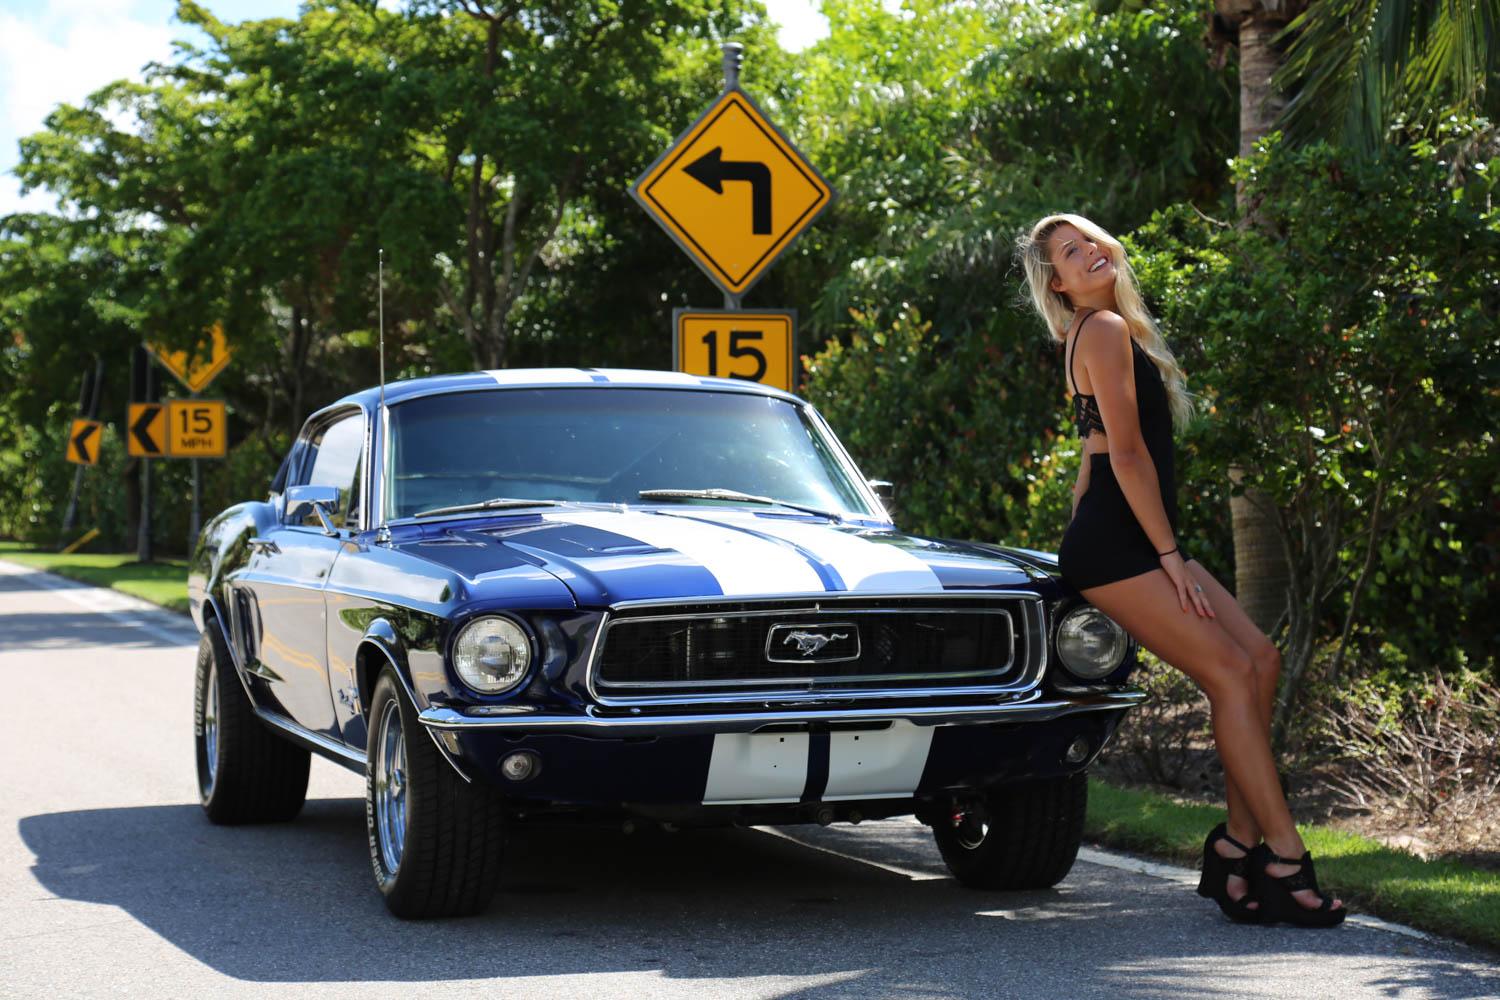 Used 1968 FASTBACK Mustang Mustang for sale Sold at Muscle Cars for Sale Inc. in Fort Myers FL 33912 3